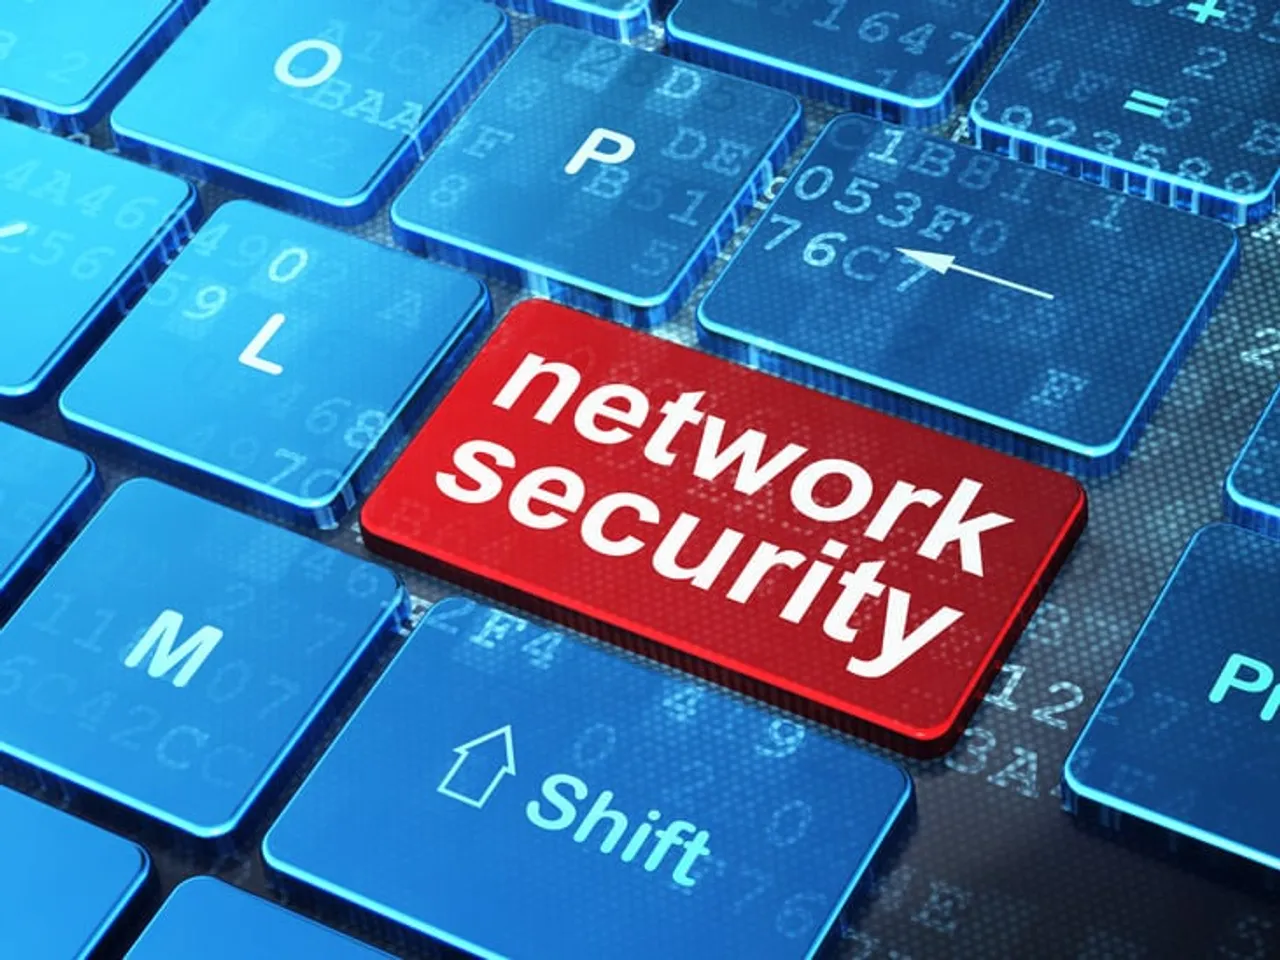 7 simple steps for SMBs to improve their network security